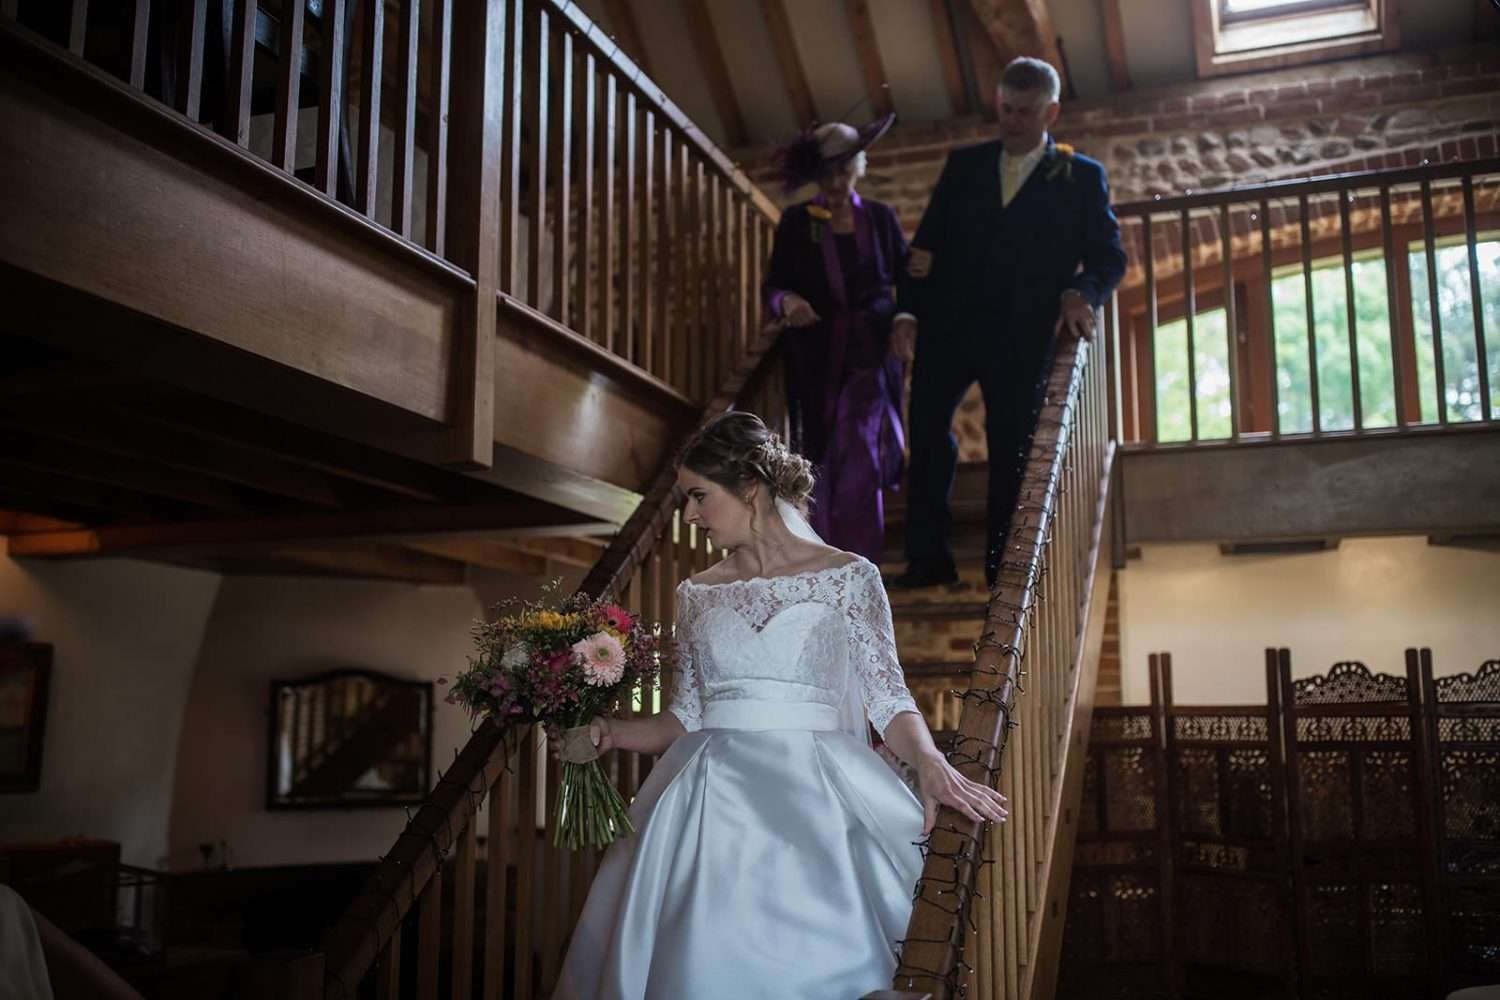 bride walks to her wedding ceremony at chaucer barn, she is accompanied by her mum and dad as they come down the stairs